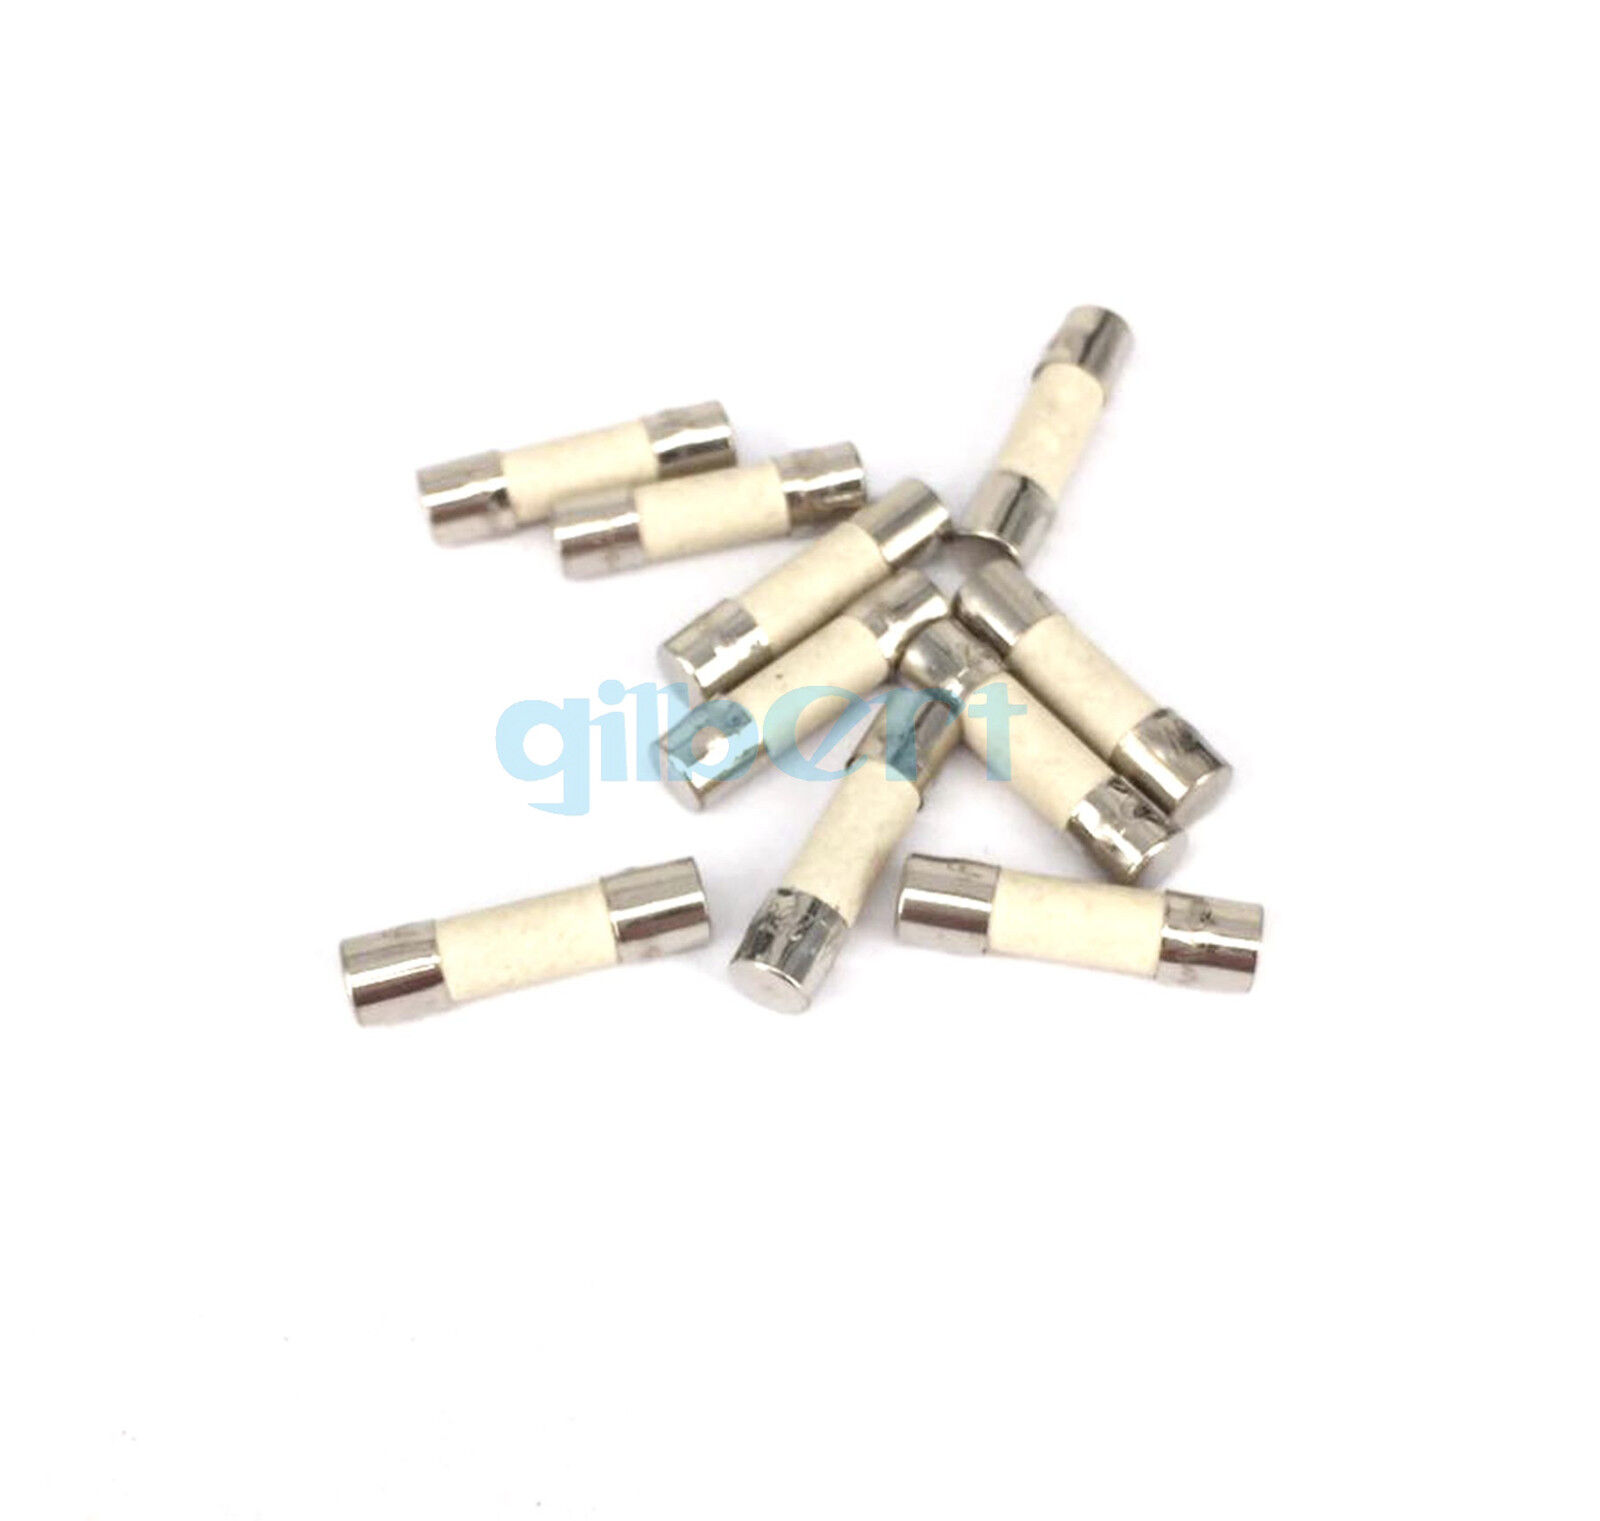 10 pieces 250V 1.25A 5x20mm Slow Blow Glass Tube Fuses 987792662947 